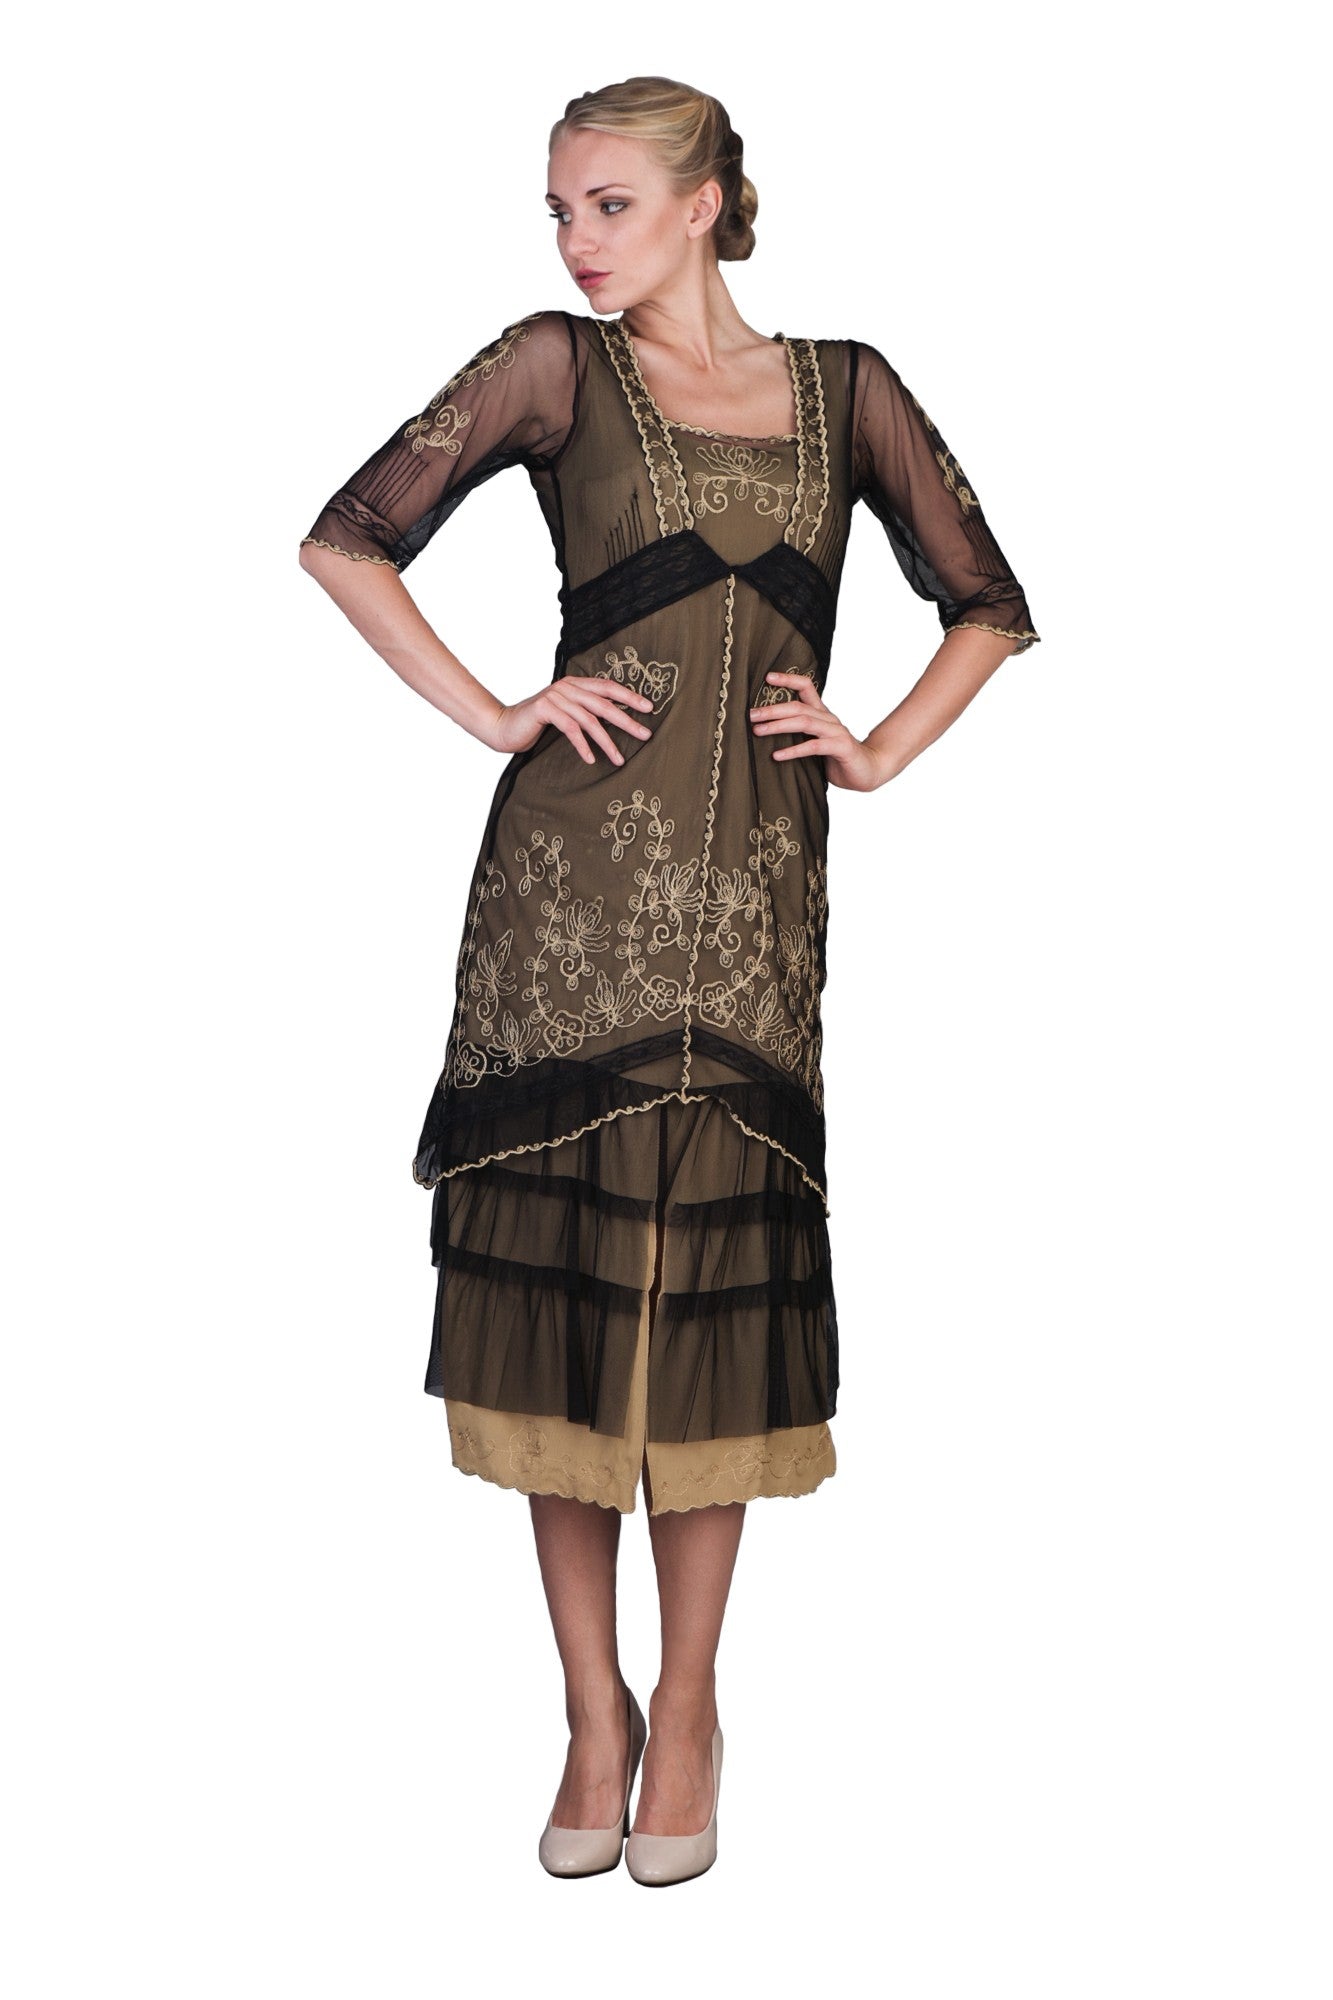 Titanic Tea Party Dress in Black Gold by Nataya - SOLD OUT